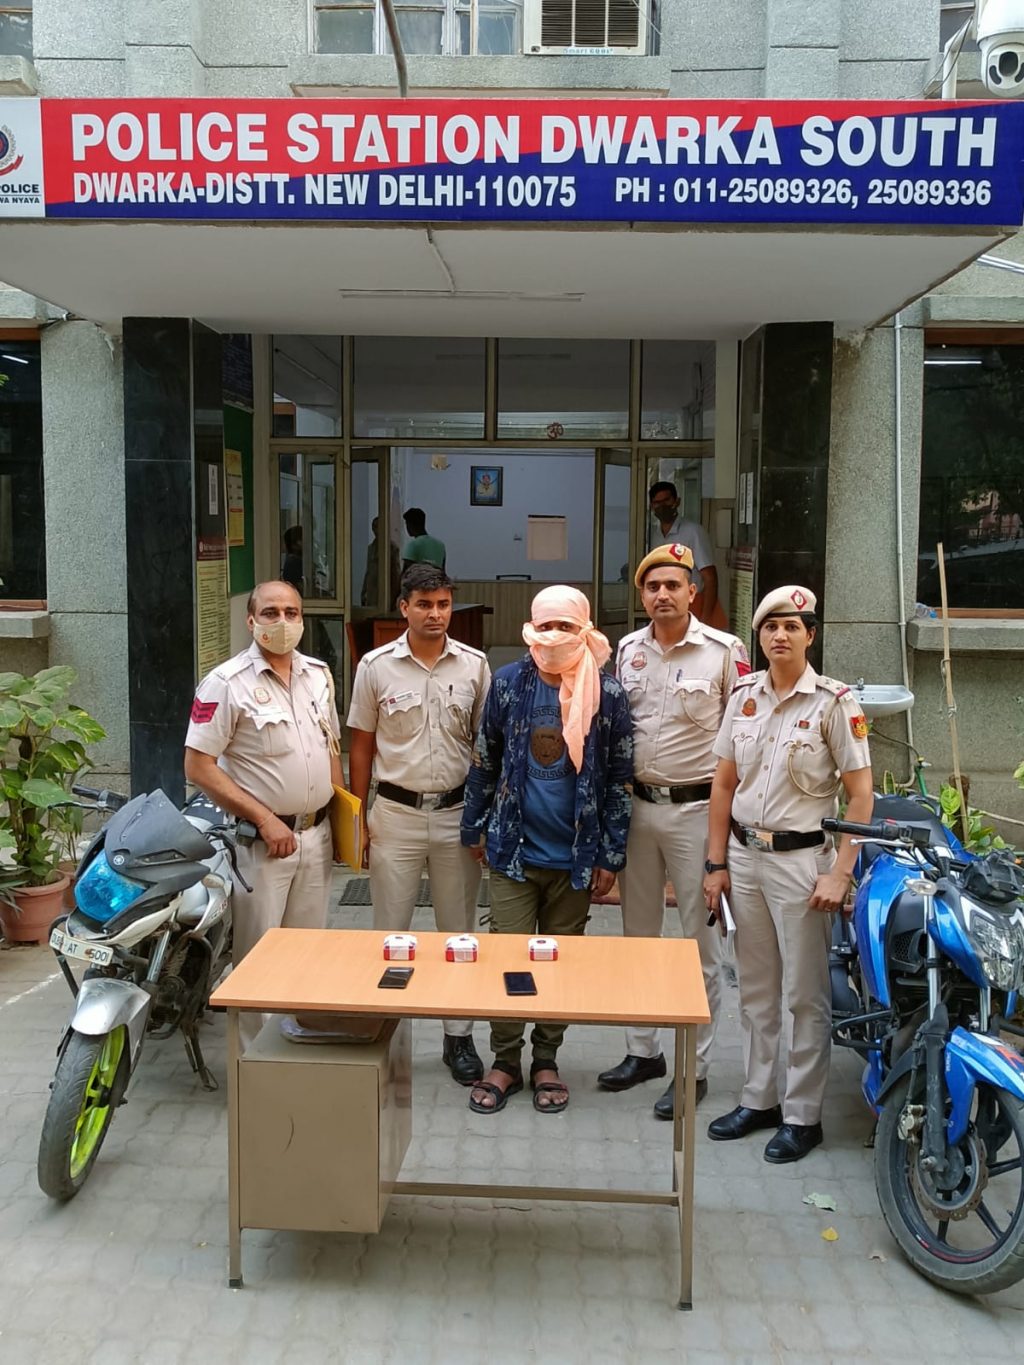 Delhi Police team led by a lady cop nabs habitual criminal in Dwarka area